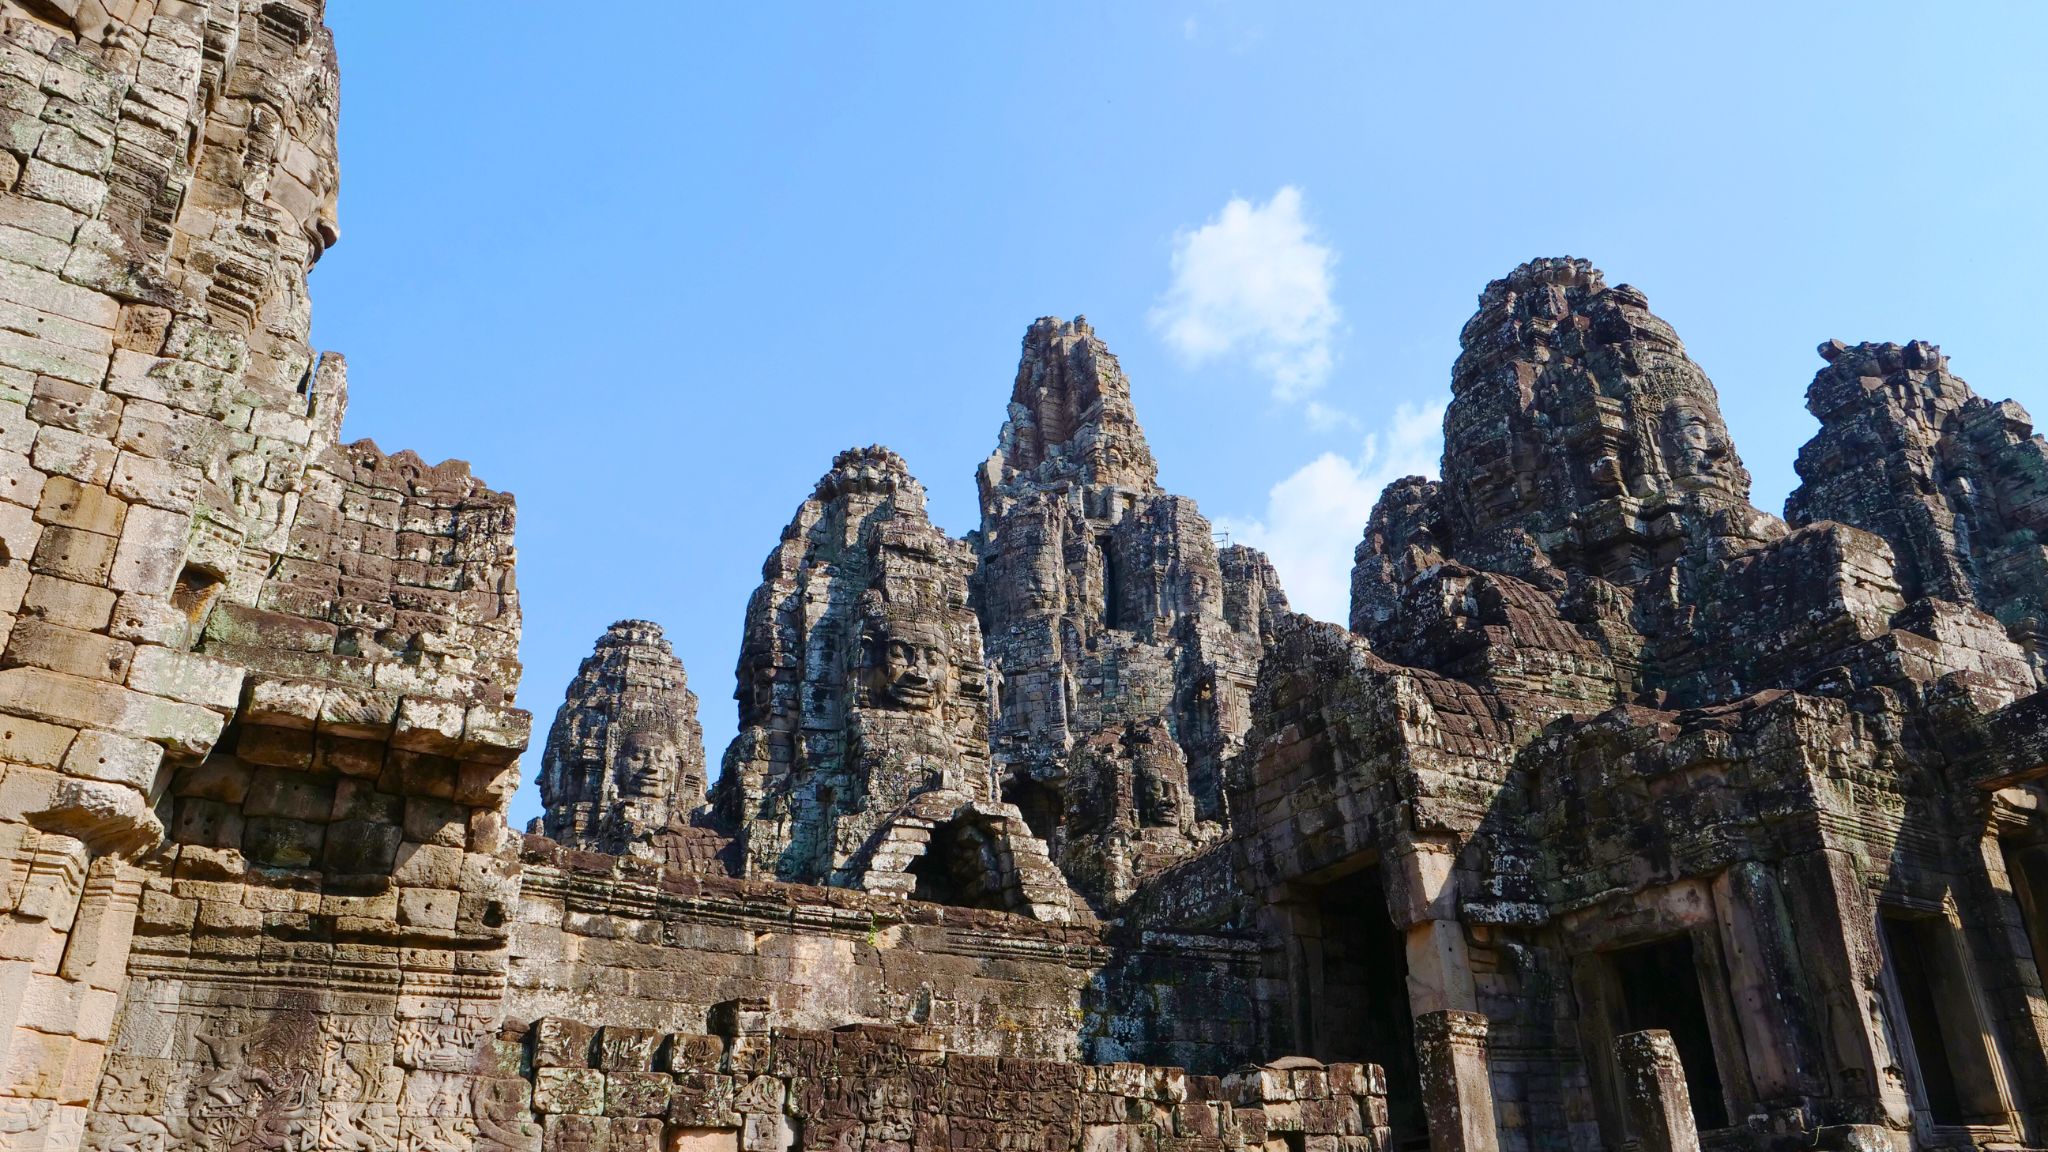 Day 1 The Bayon Temple Is Famous For Its Over 200 Smiling Faces Of Avalokitesvara